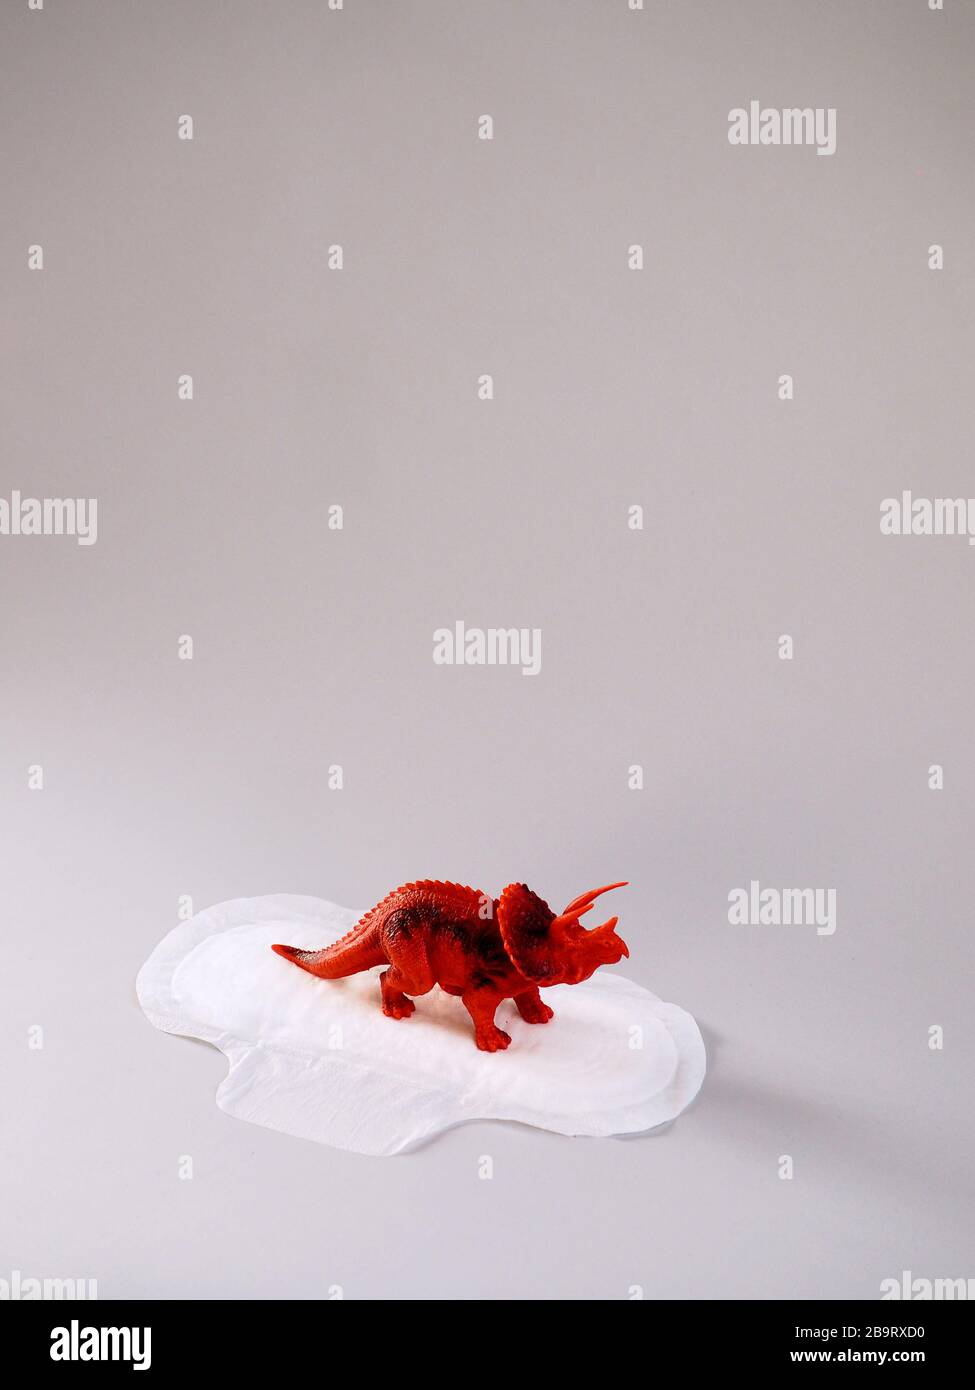 Menstrual pad with red triceratops on gray background. Minimalist still life photography concept. Women critical days, gynecological menstruation cycl Stock Photo